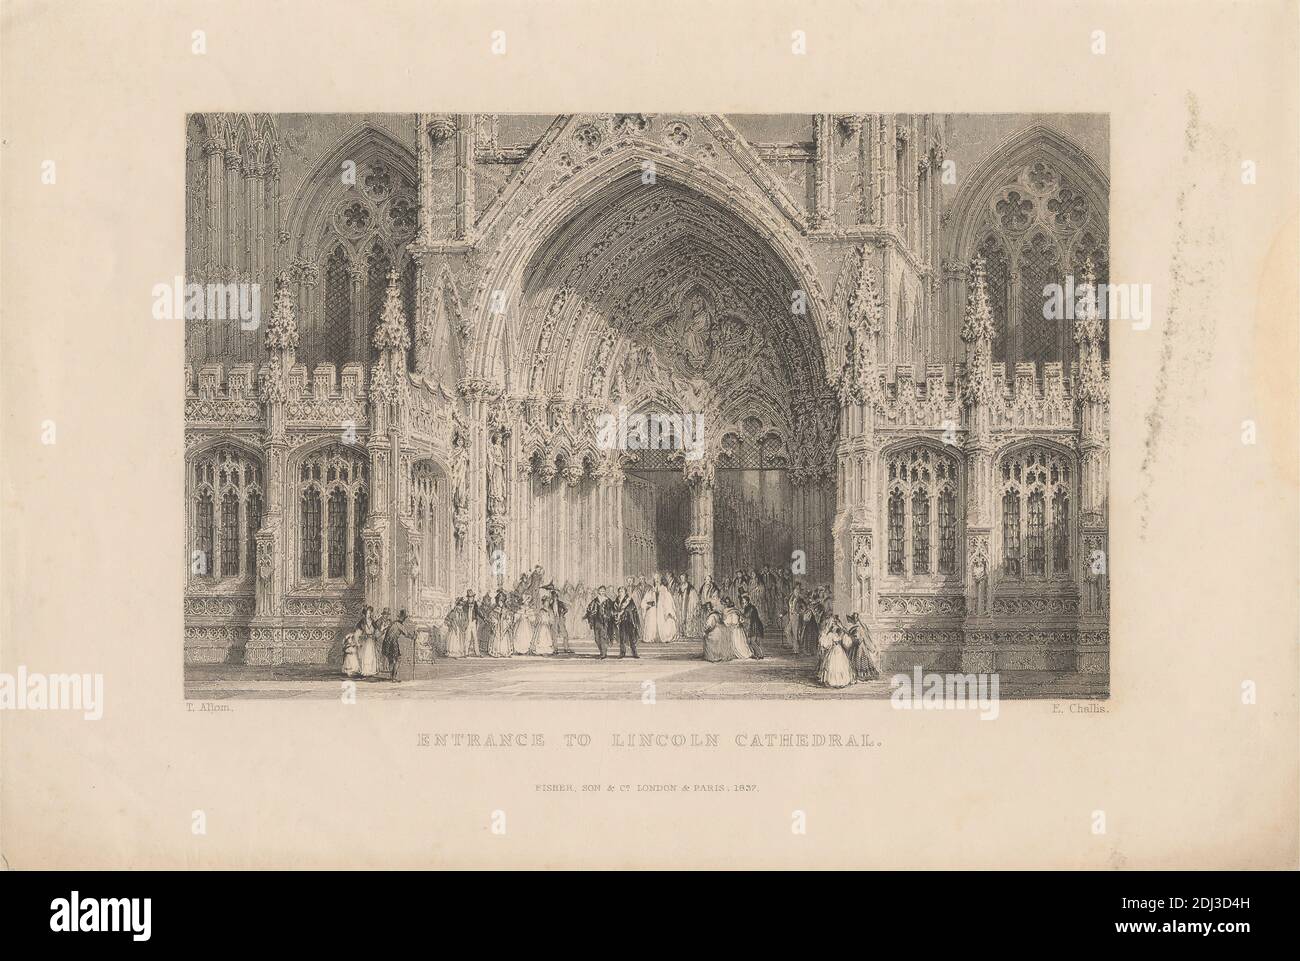 Entrance to Lincoln Cathedral, Print made by Ebenezer Challis, active 1837–1859, after Thomas Allom, 1804–1872, British, Published by Fisher, Son & Co., active 1821–1848, British, 1837, Etching on moderately thick, smooth, cream wove paper, Sheet: 5 13/16 x 8 5/8 inches (14.8 x 21.9 cm) and Image: 3 7/8 x 6 1/16 inches (9.8 x 15.4 cm), arch, architectural subject, canes, cathedral, church, dresses, entrance hall, fancy dress, men, nave, people, priests, sculpture, stained glass, statues, top hats, windows, women, England, Lincoln, Lincoln Cathedral, Lincolnshire, United Kingdom Stock Photo